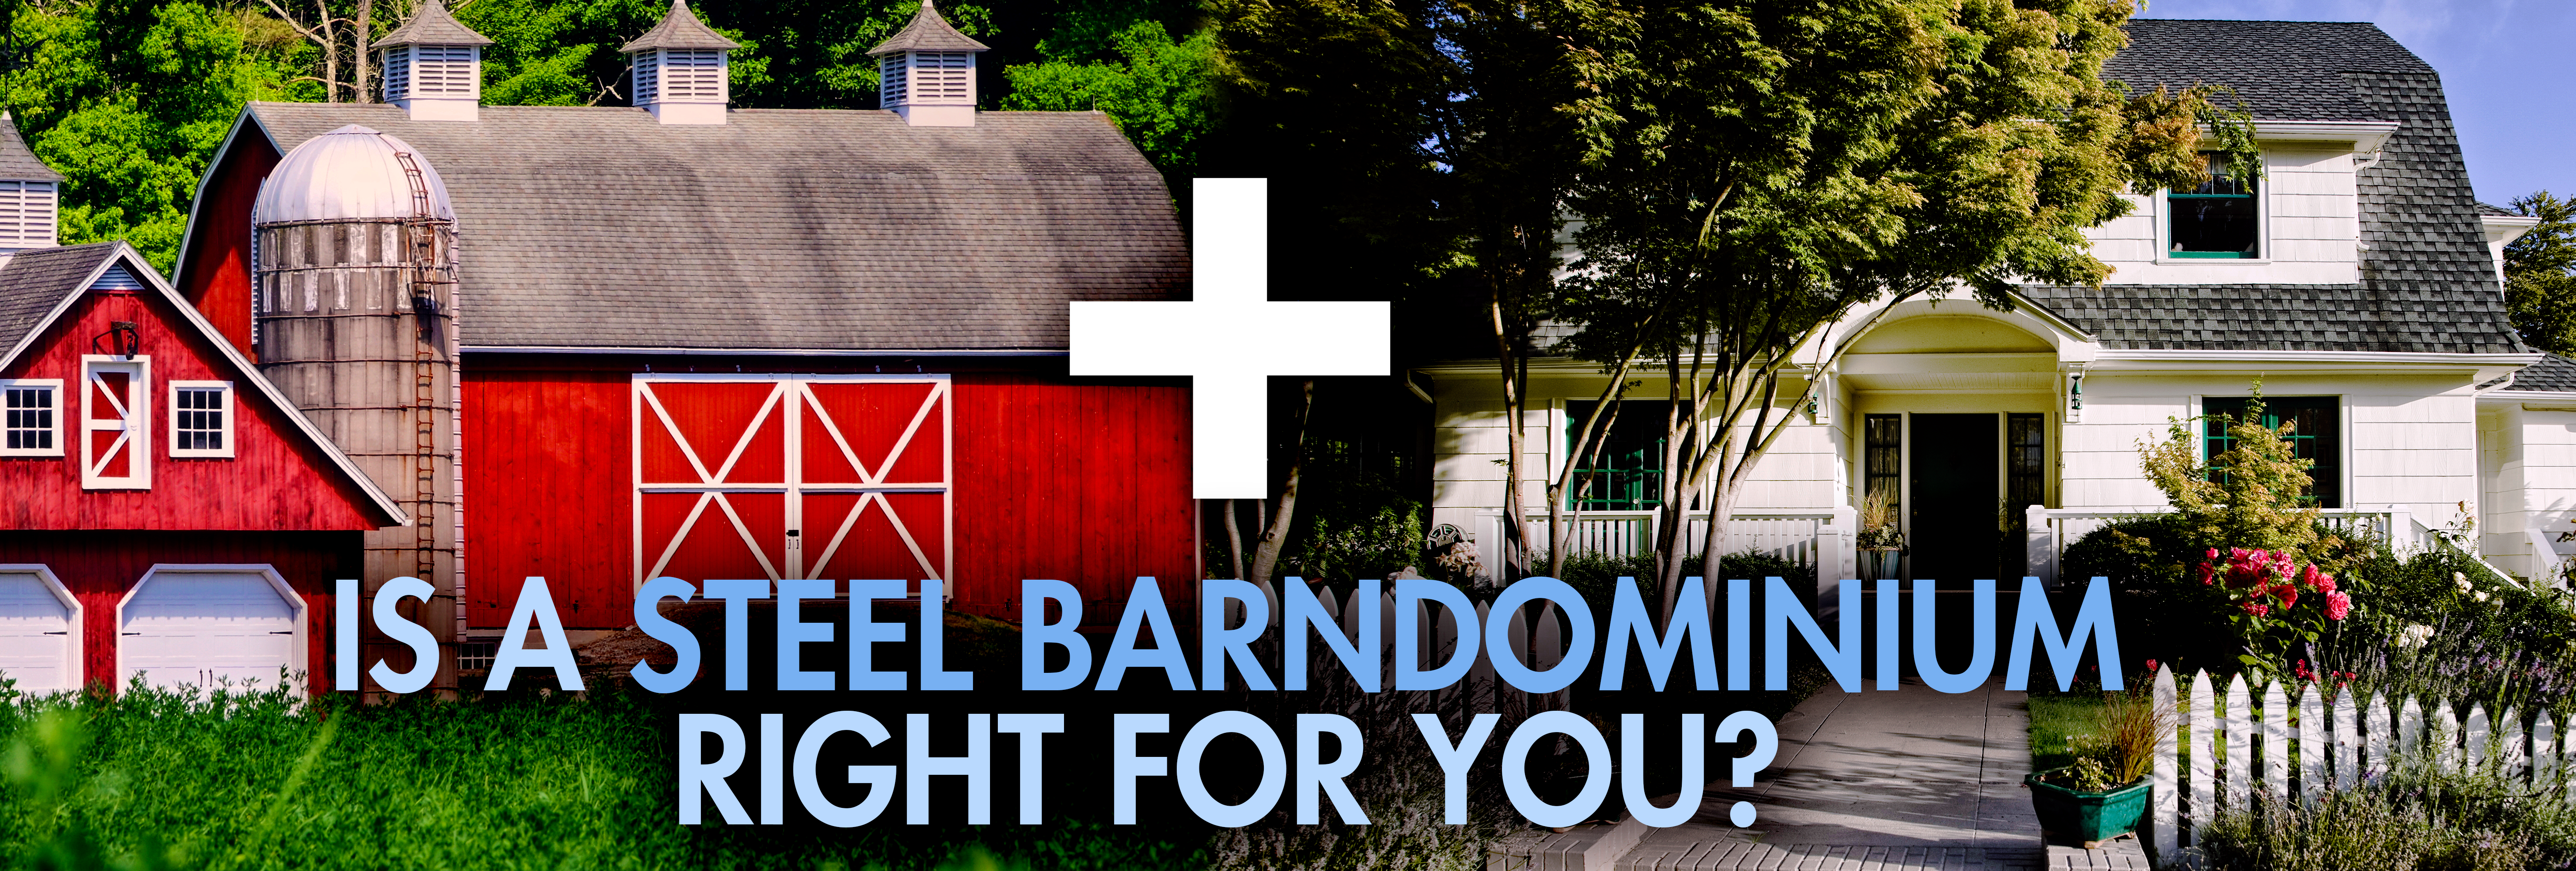 Steel Barndominium Kits vs. Traditional Construction: Which Is Right for You?